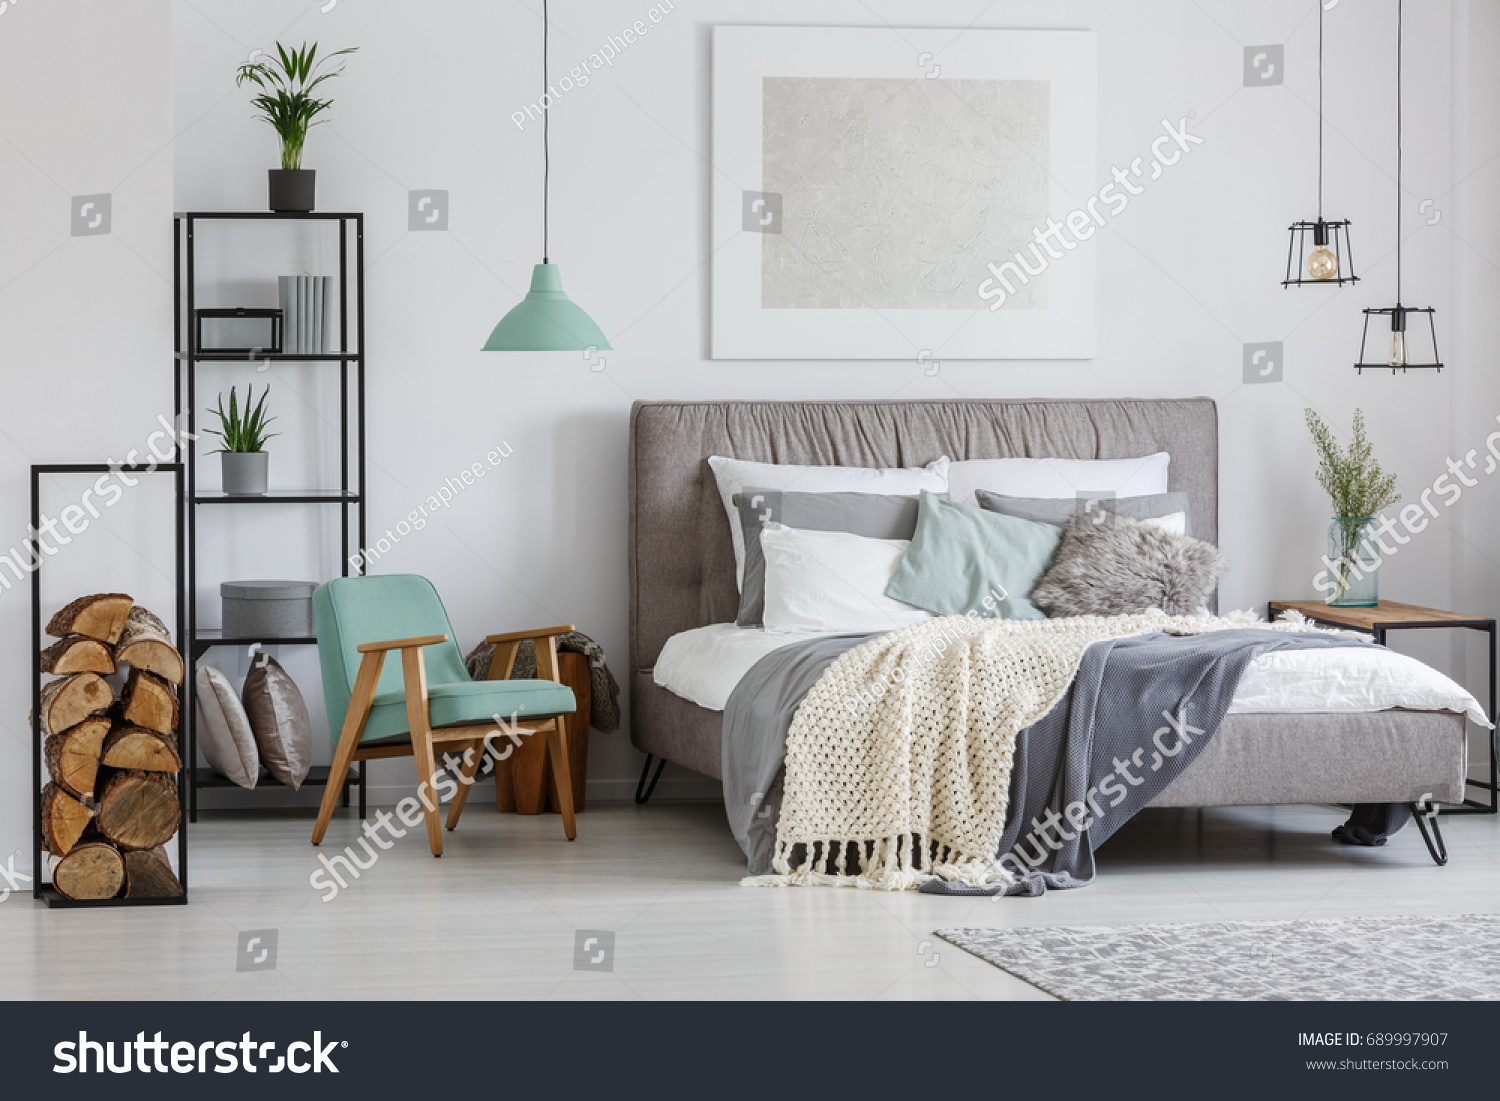 Cozy stylish hotel room with decorative wood pieces in metal frame #689997907